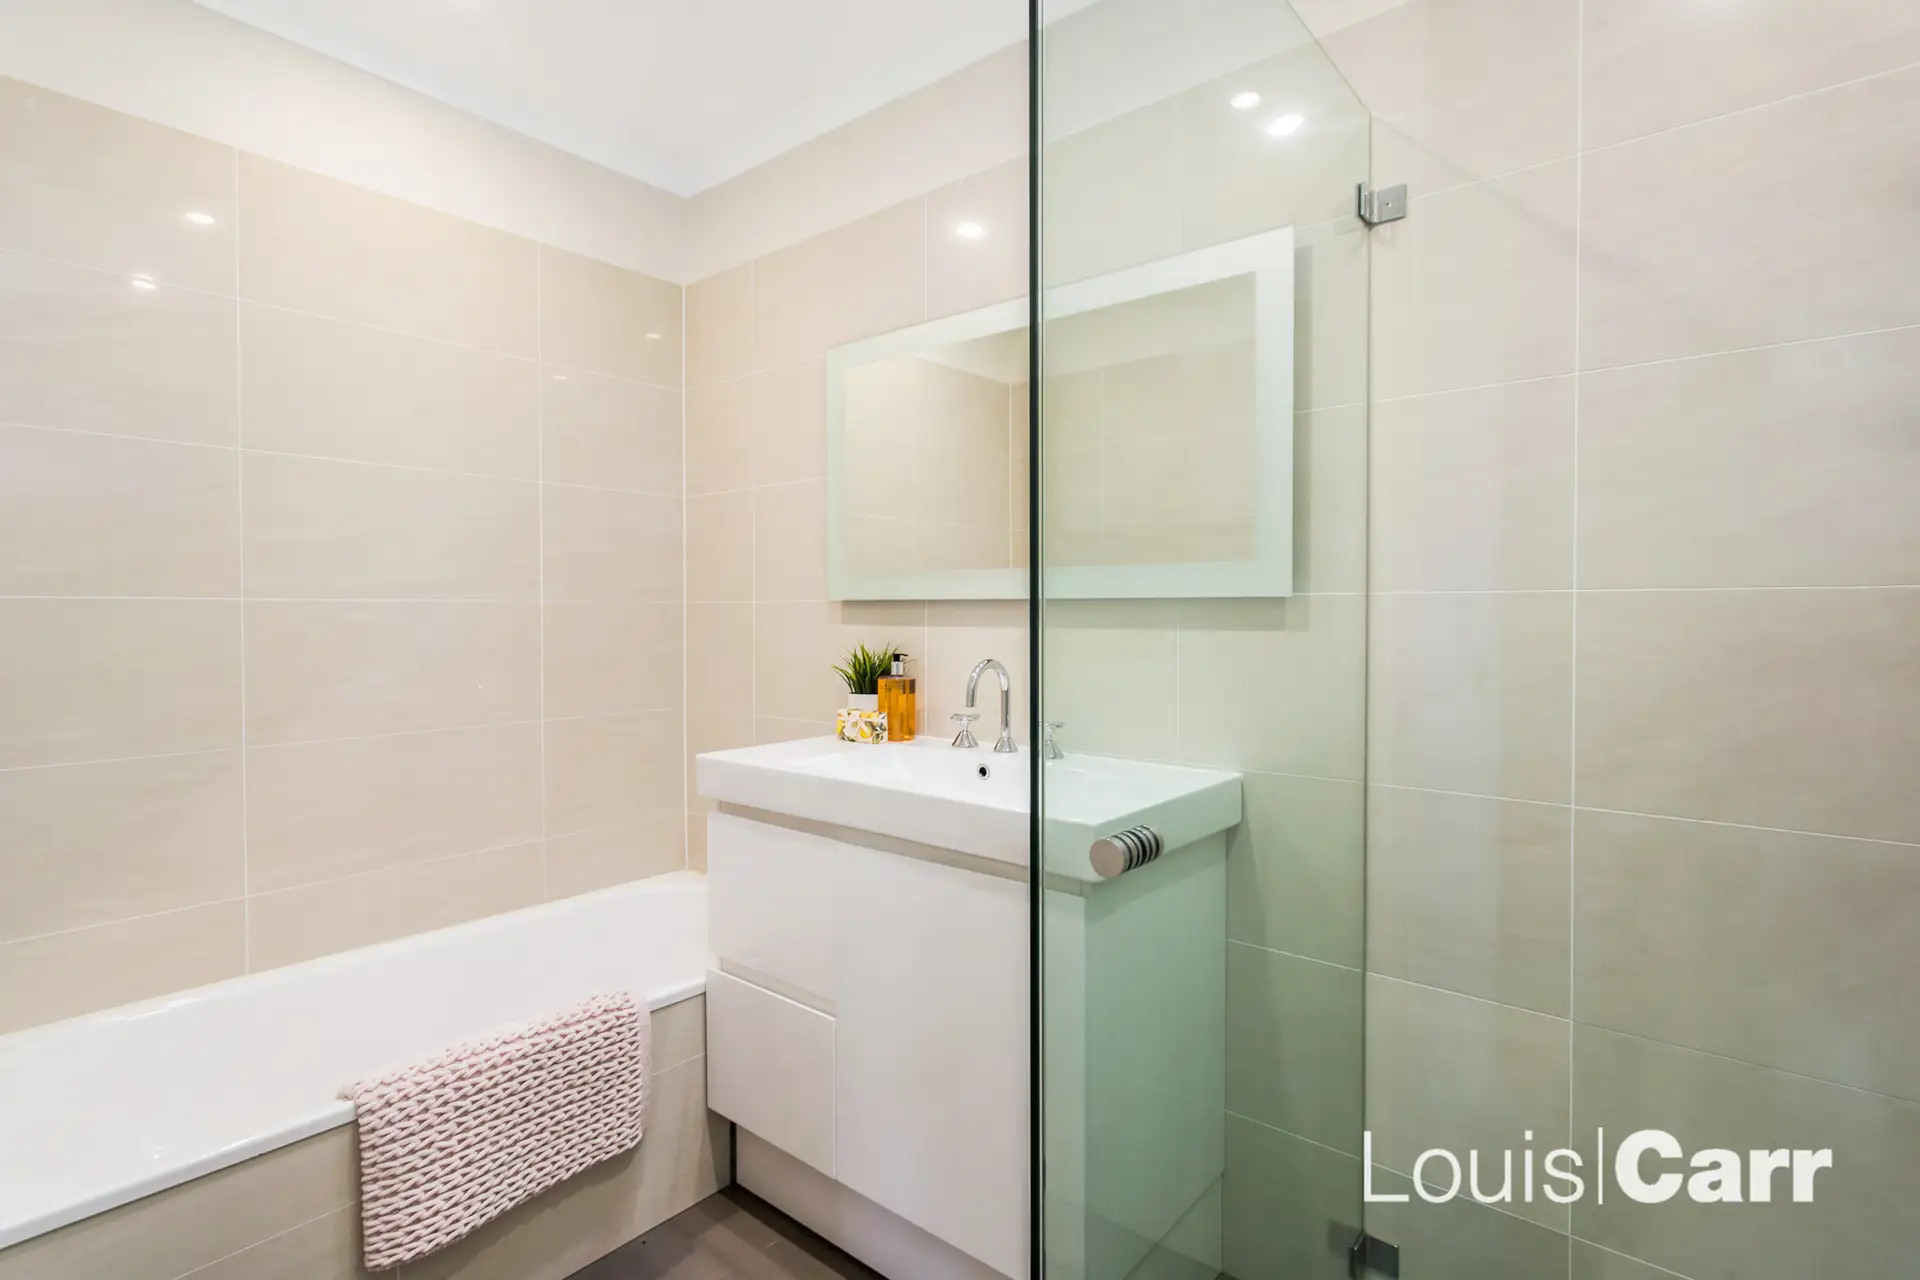 Photo #12: 4a Haven Court, Cherrybrook - Sold by Louis Carr Real Estate